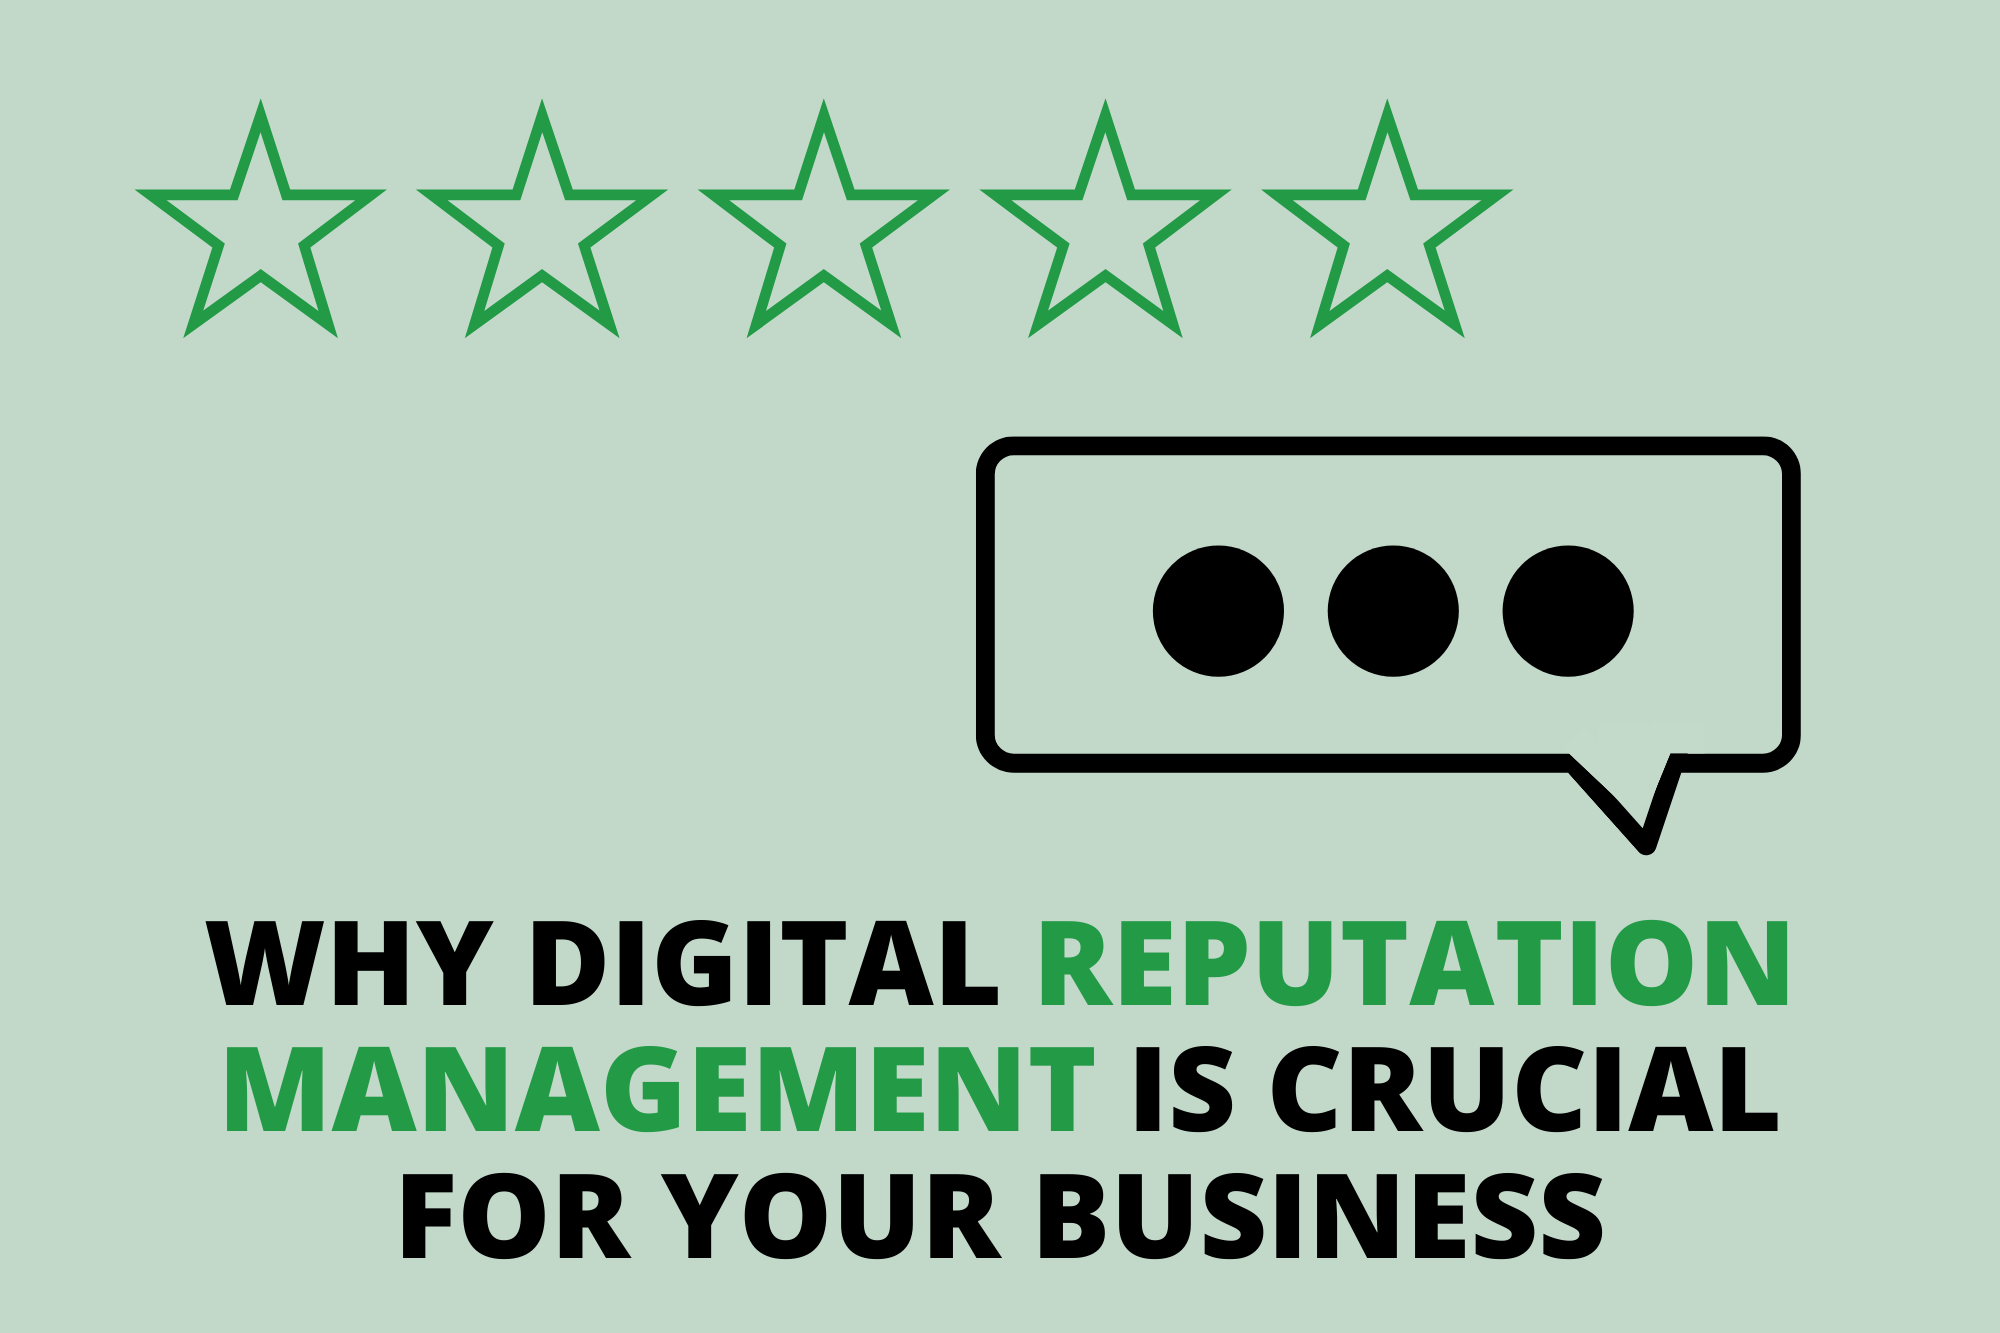 Why Digital Reputation Management Is Crucial for Your Business